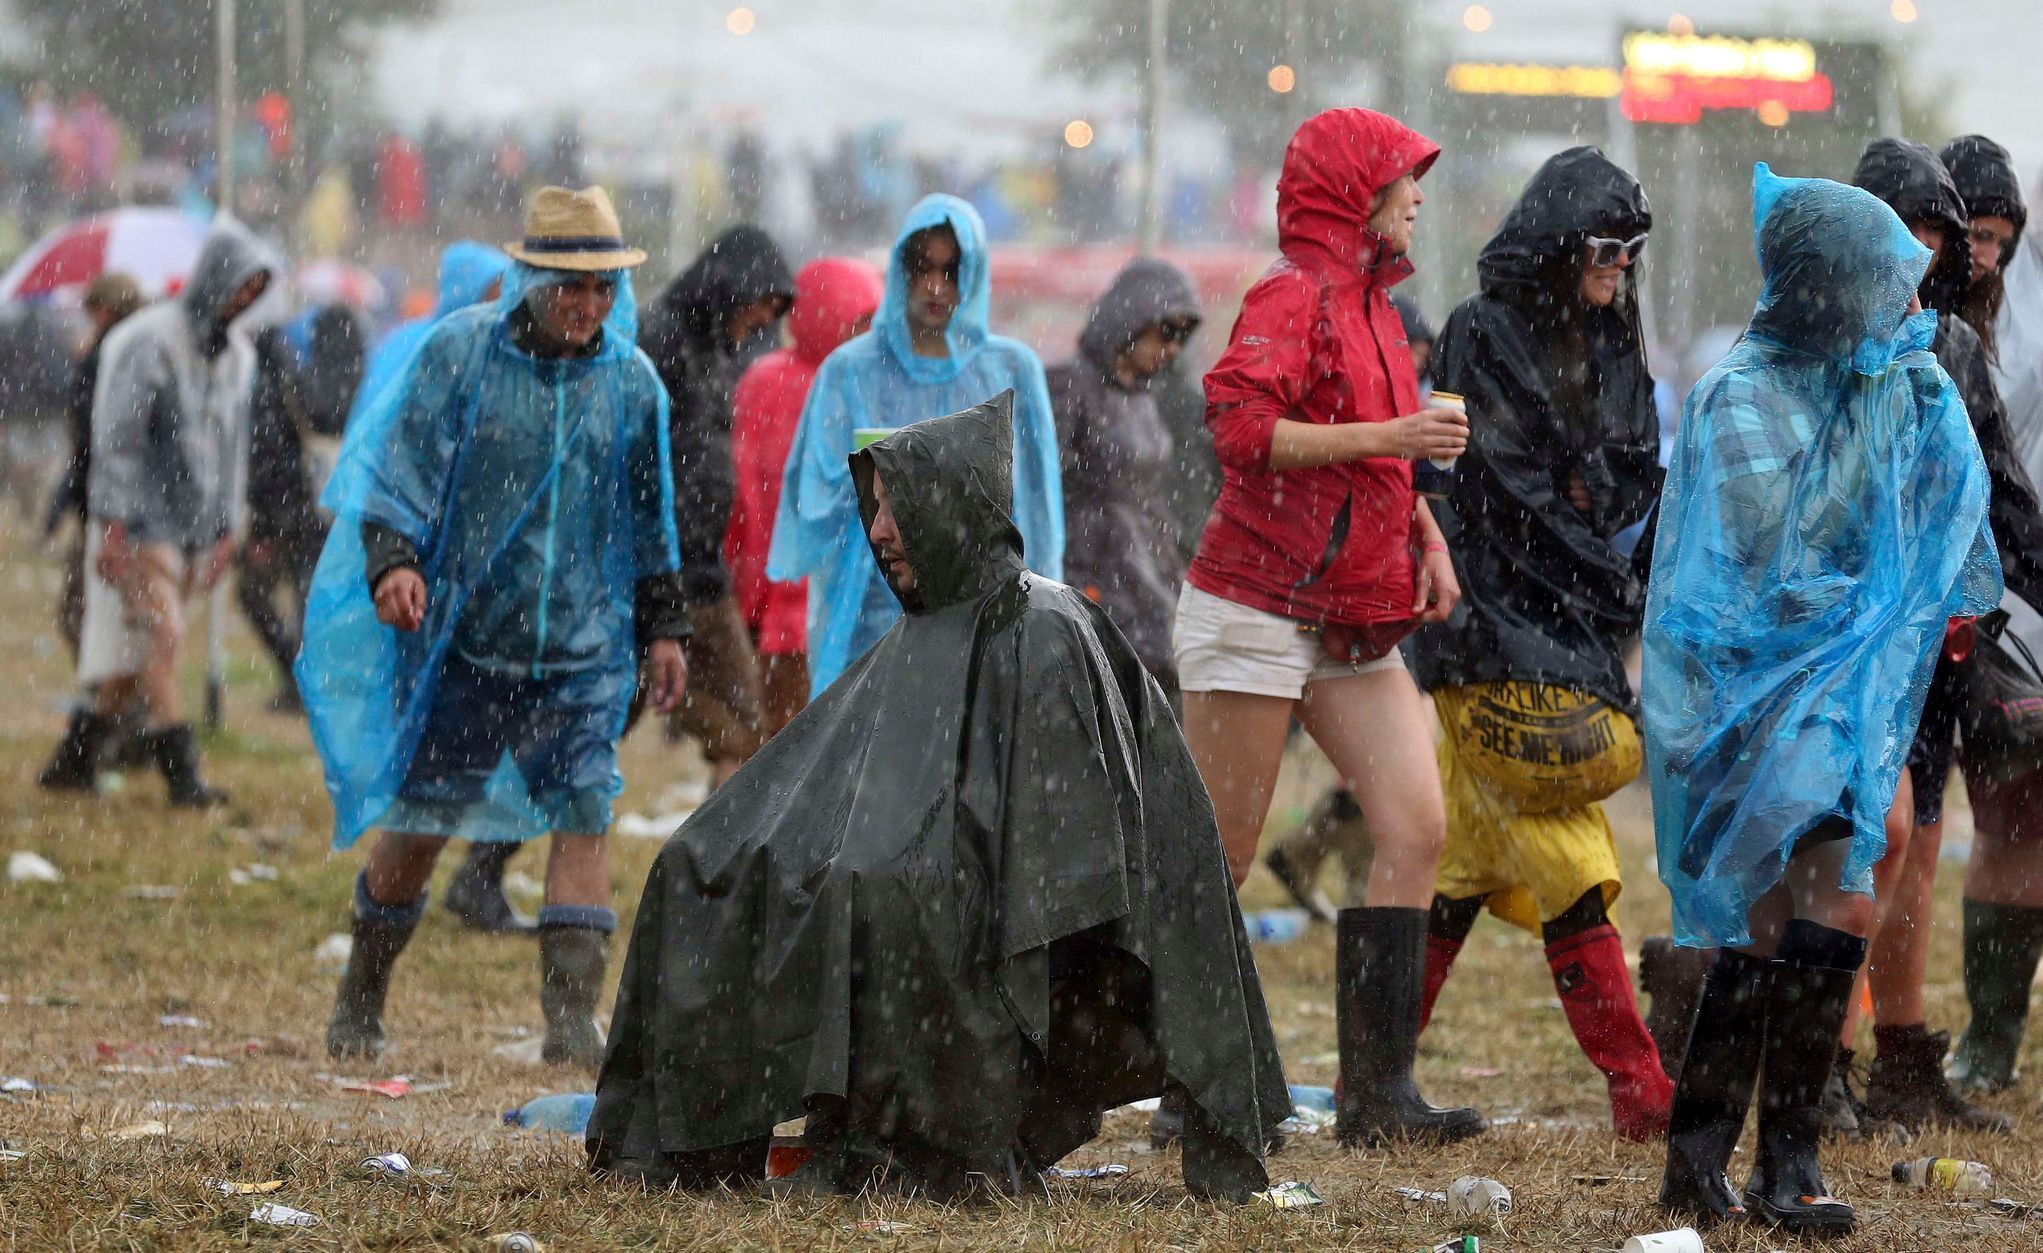 A man takes shelter from the rain in a poncho in front of the Other Stage at Worthy Farm in Somerset, during the Glastonbury Festival